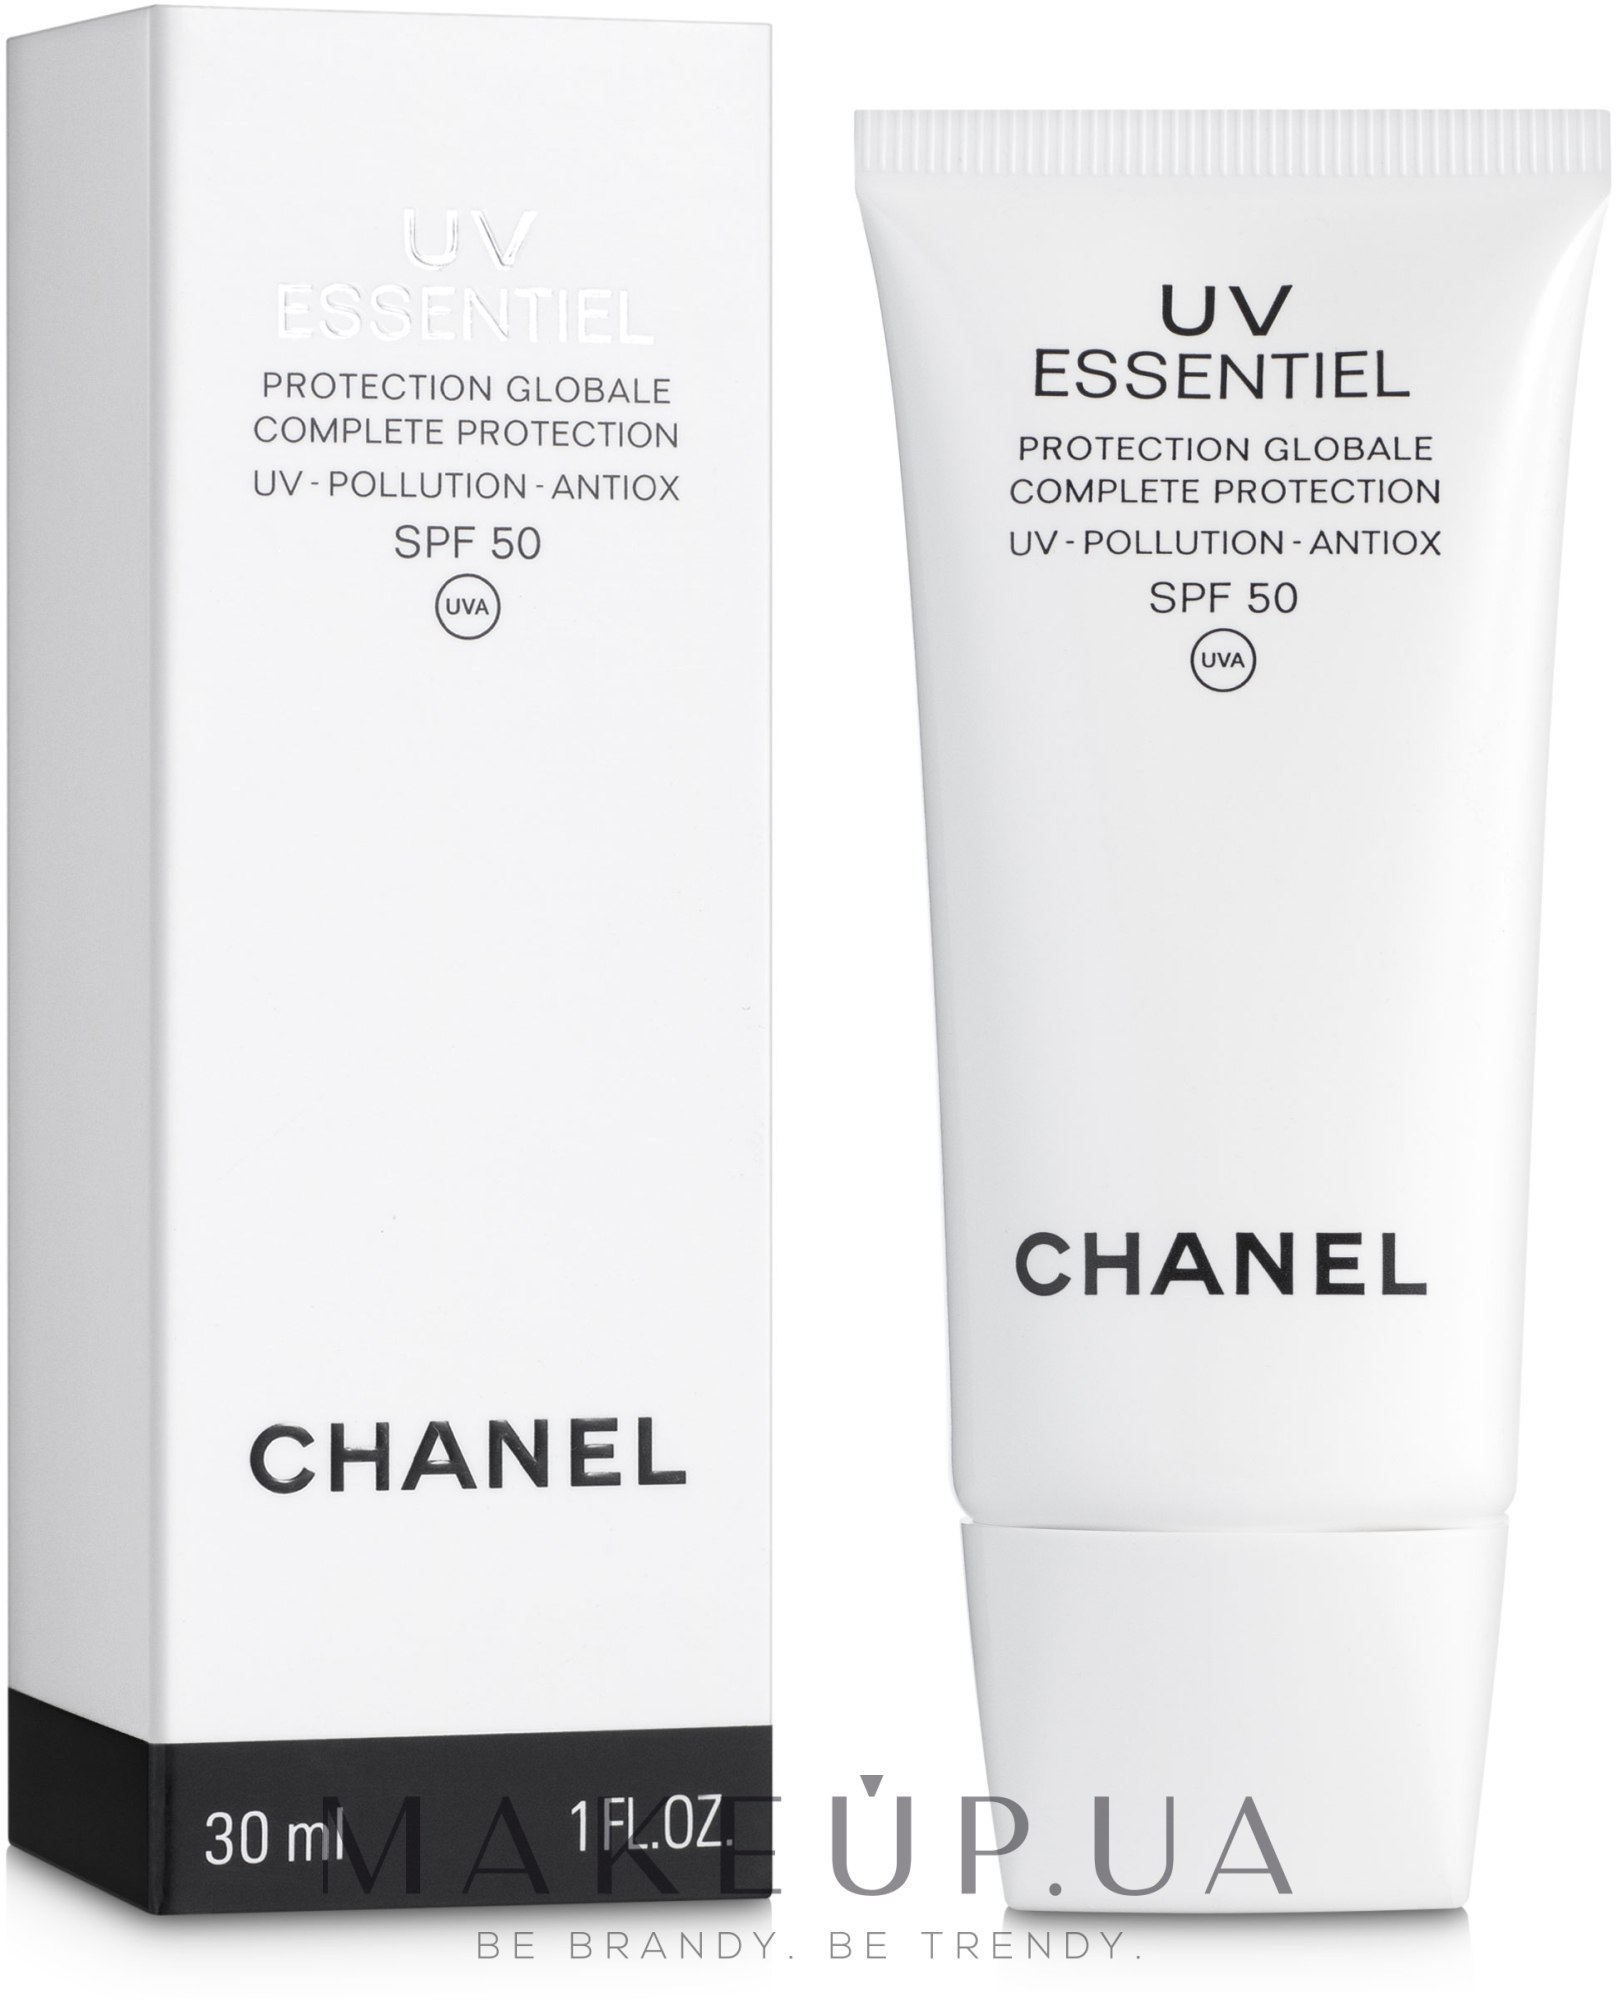 chanel sunscreen for face